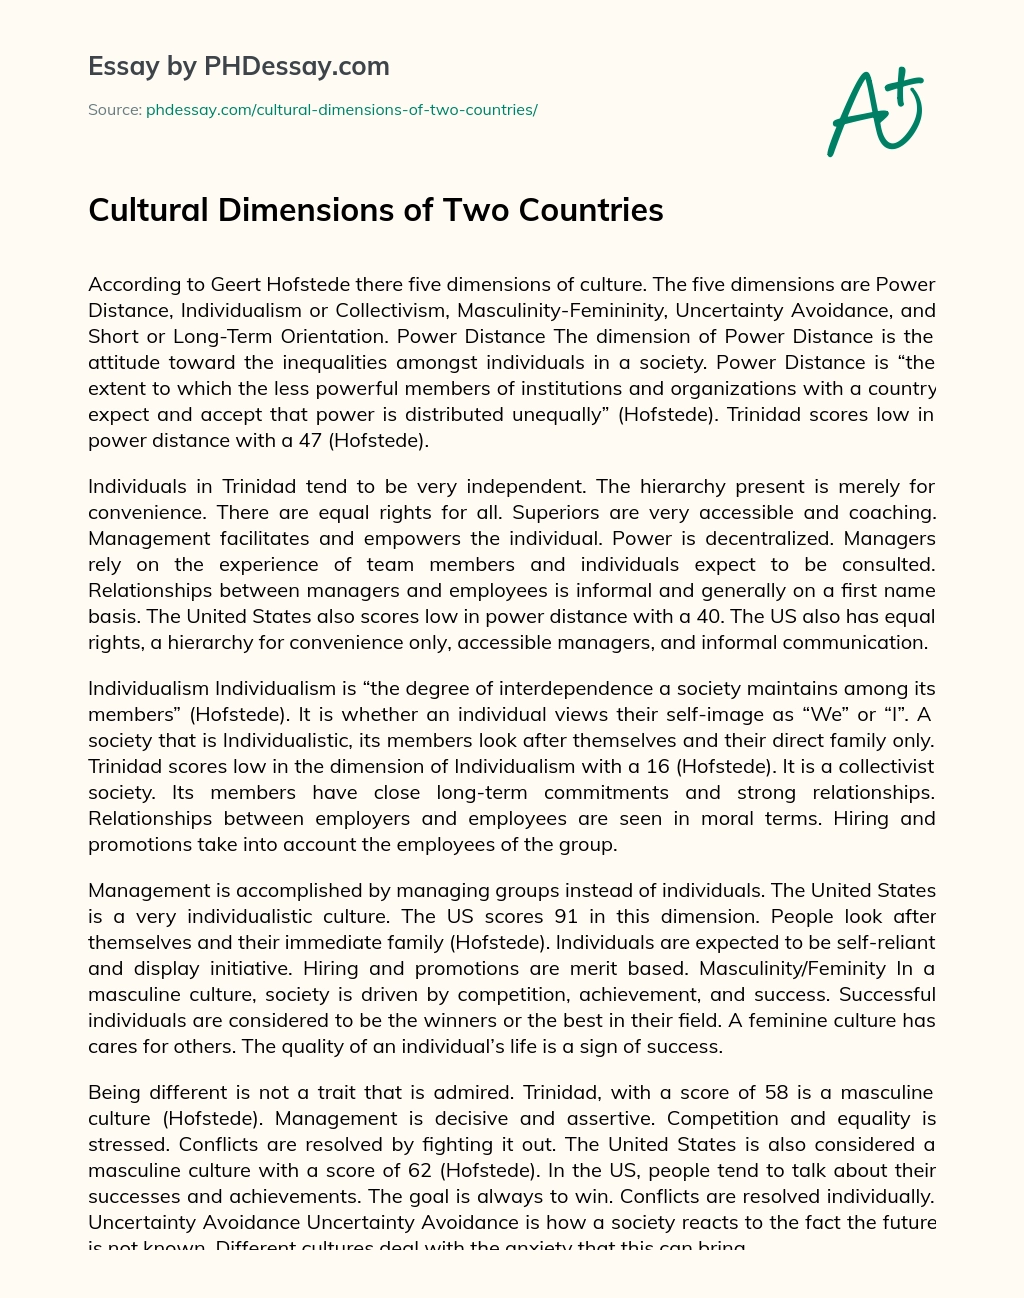 Cultural Dimensions of Two Countries essay